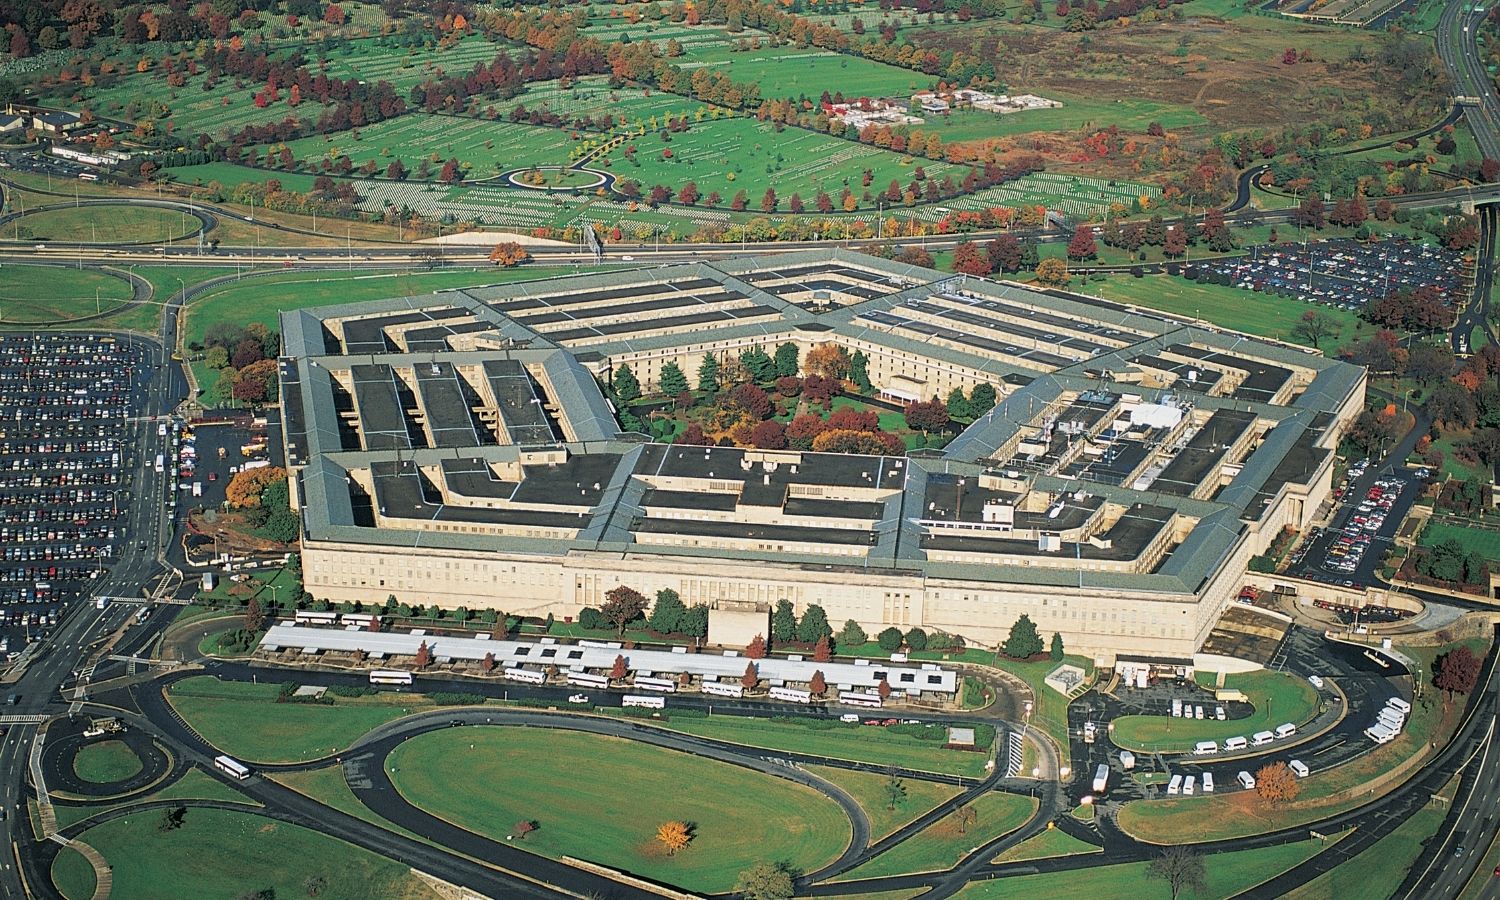 OTD in 1943: Construction of The Pentagon was completed.